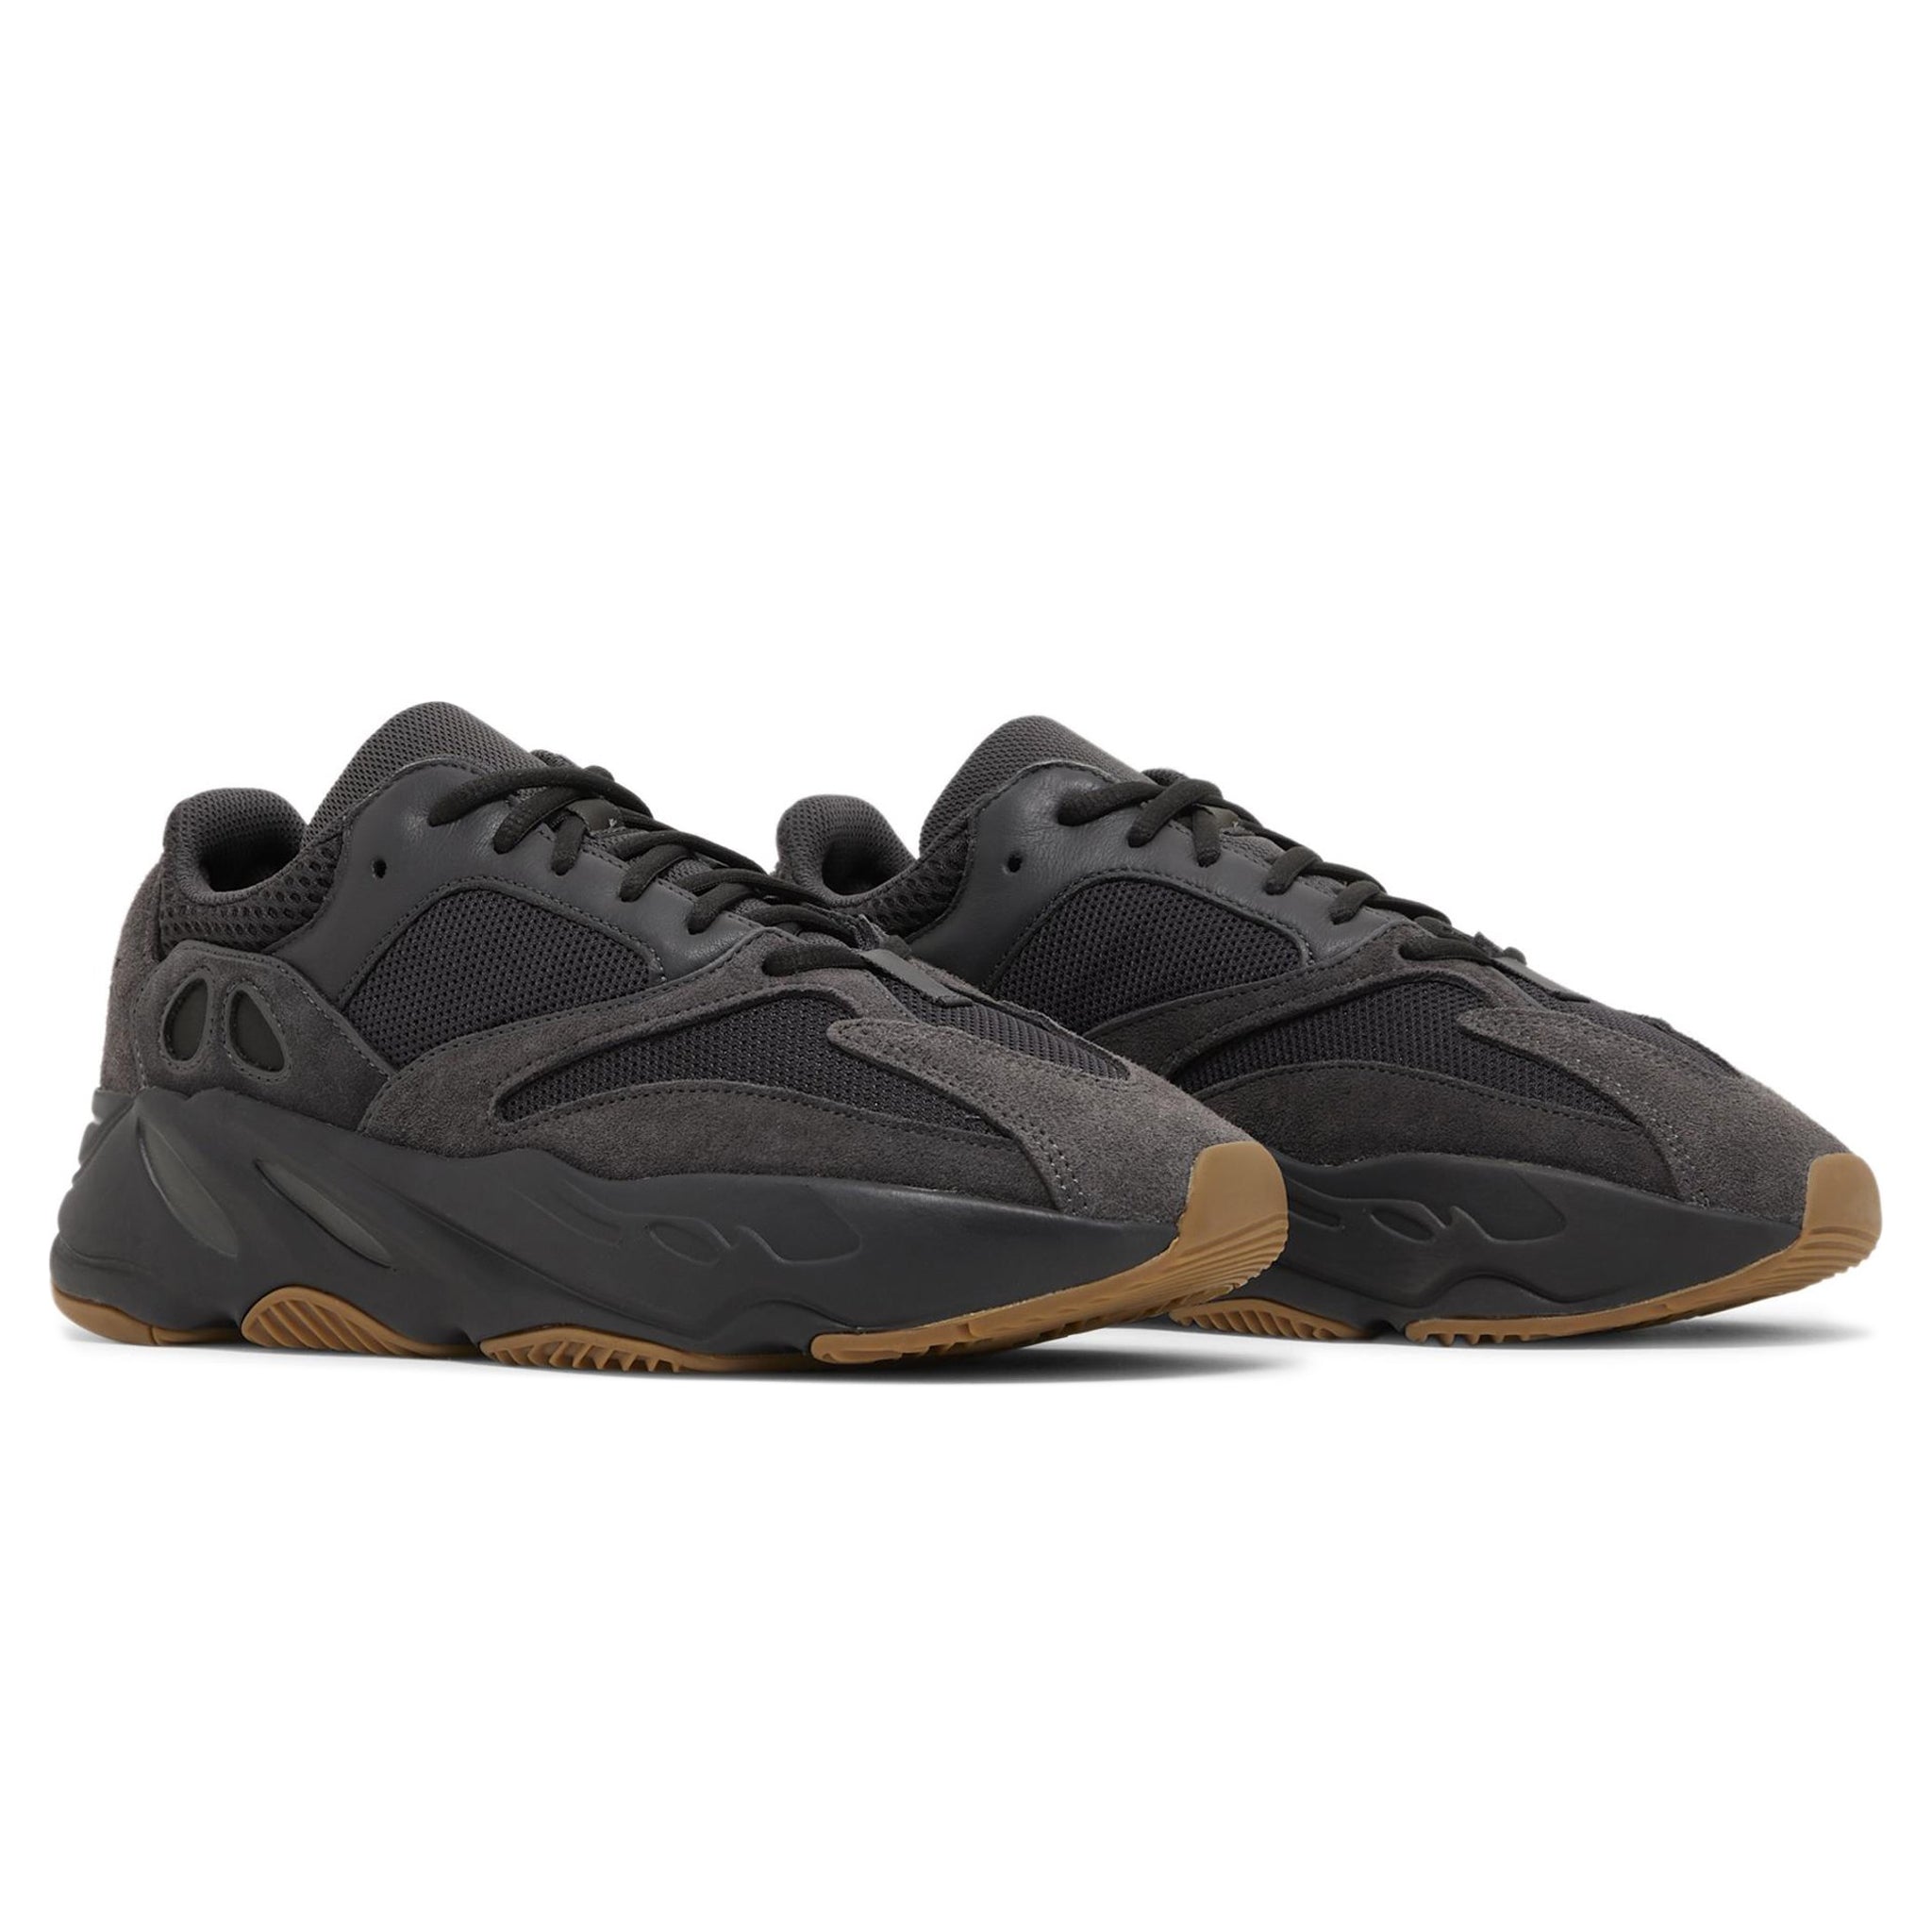 Front side view of Adidas Yeezy Boost 700 Utility Black (2019/2023) FV5304